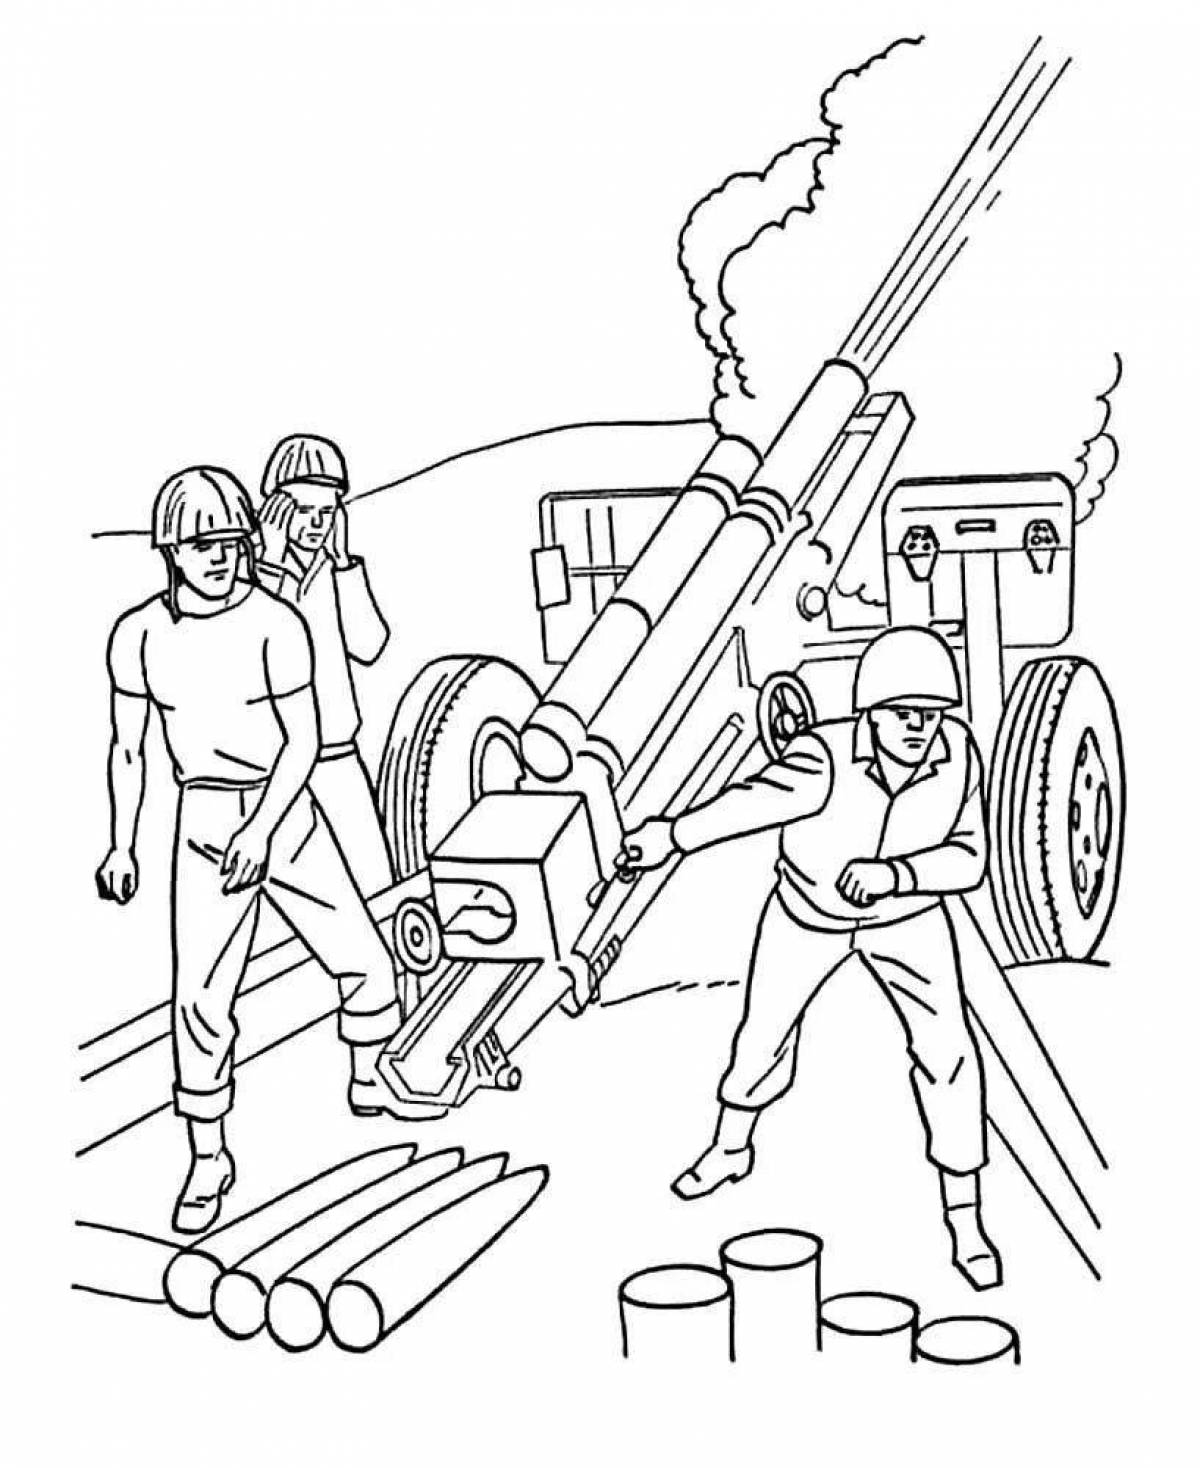 Lively children's military coloring